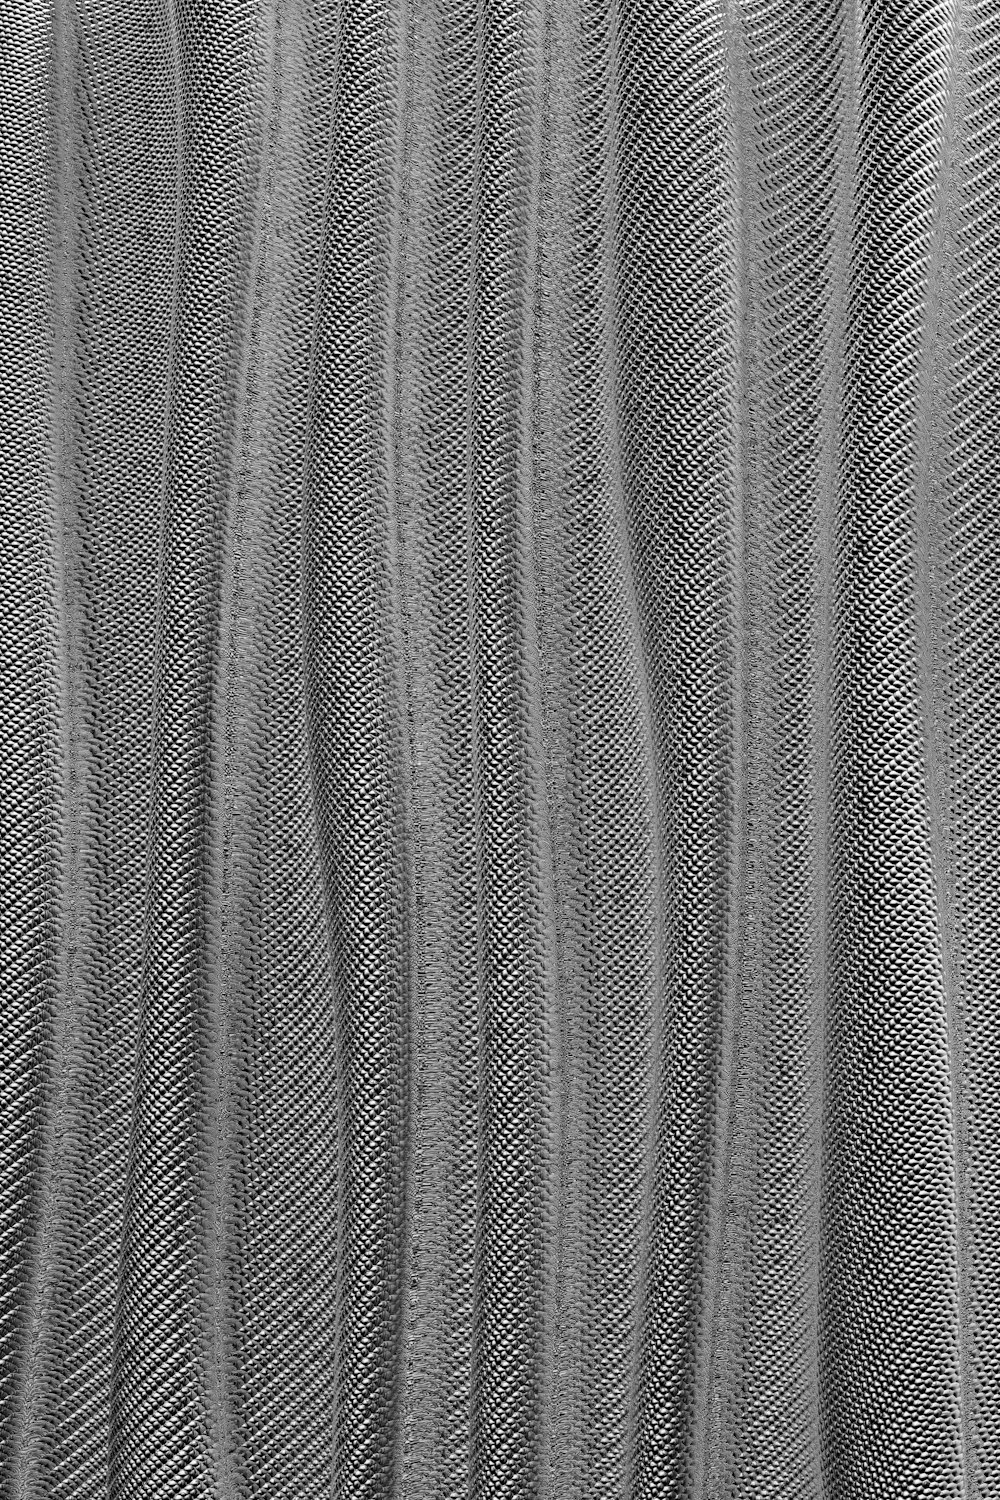 a black and white photo of a cloth